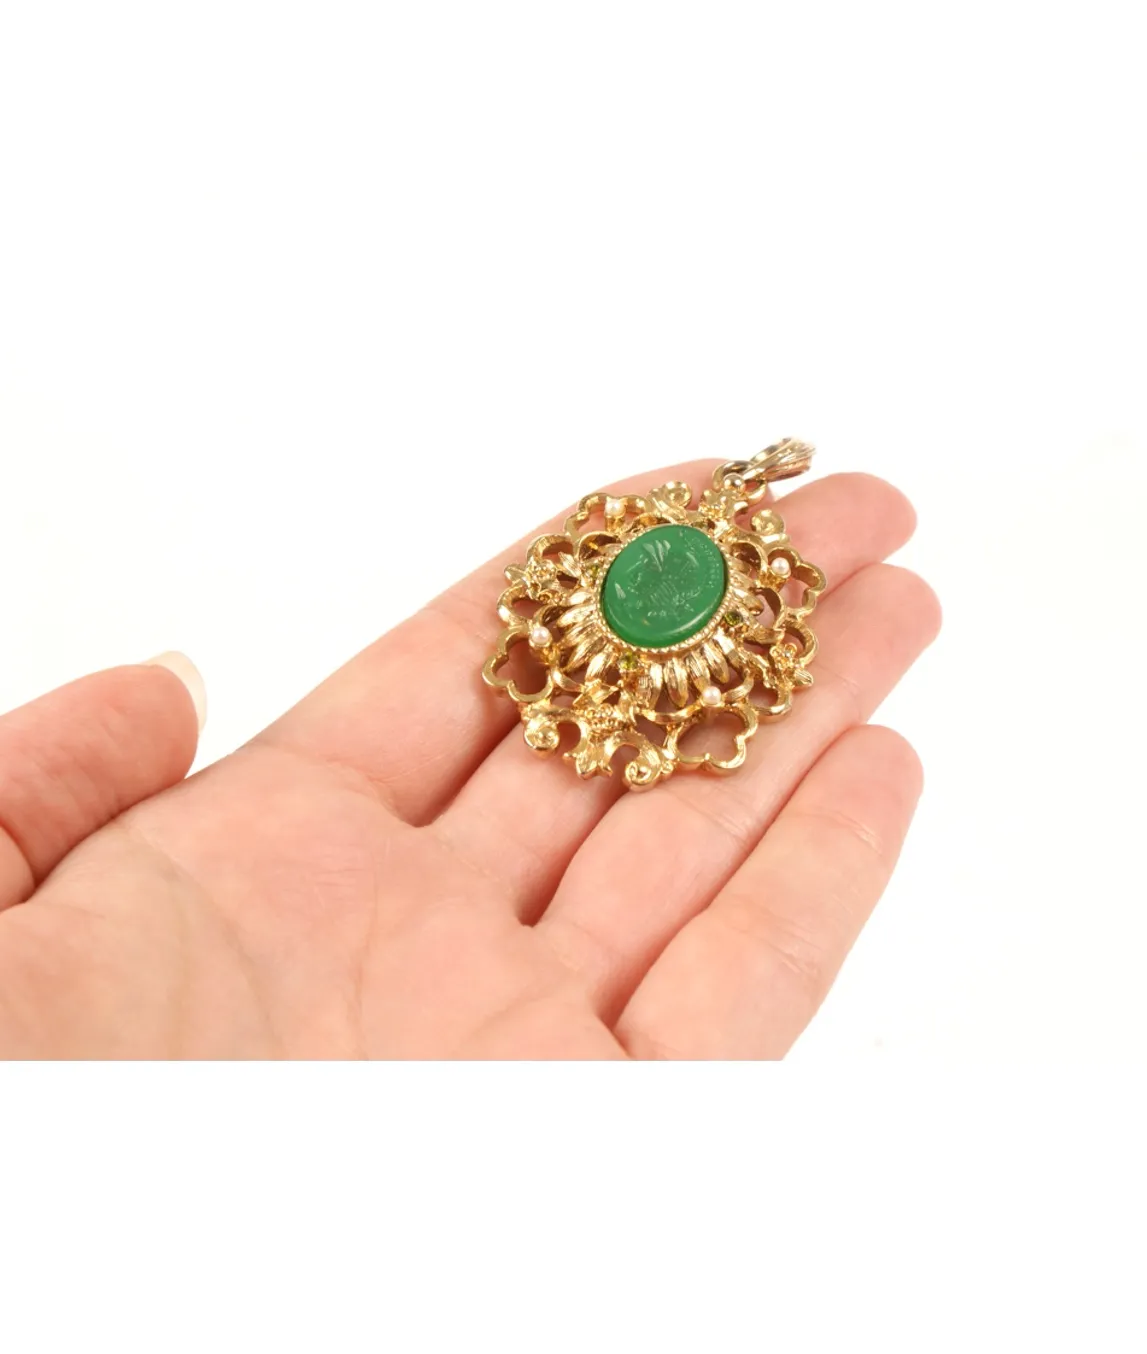 Kenneth Jay Lane green cameo pendant size